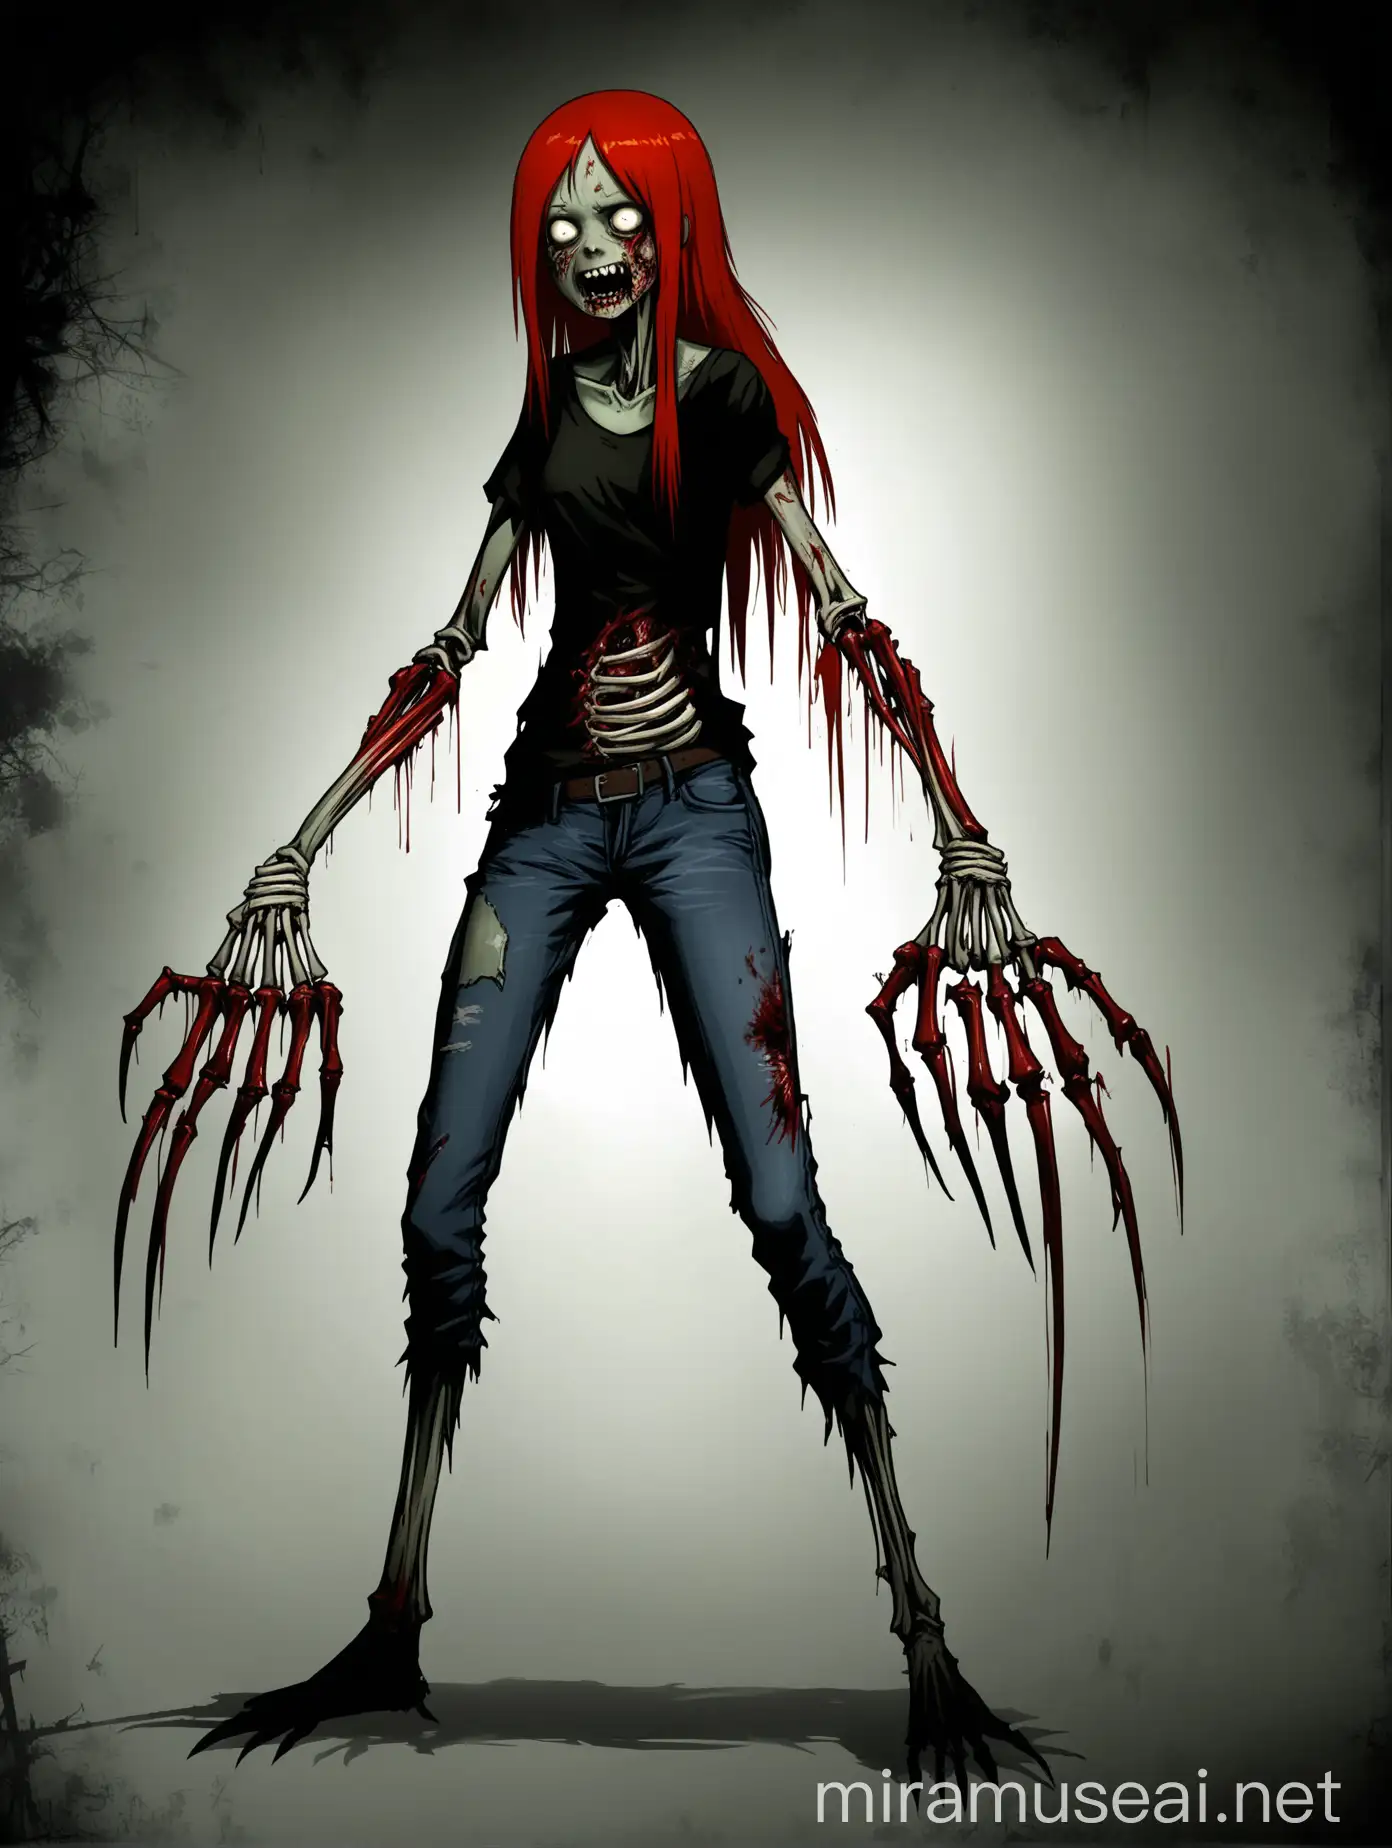 left 4 dead concept art of a special infected zombie girl, red half long hair, claws, big long needle like teeths, four arms, bones, gore, intetsines, slim slender body, small breasts, wearing black shirt with jeans, 